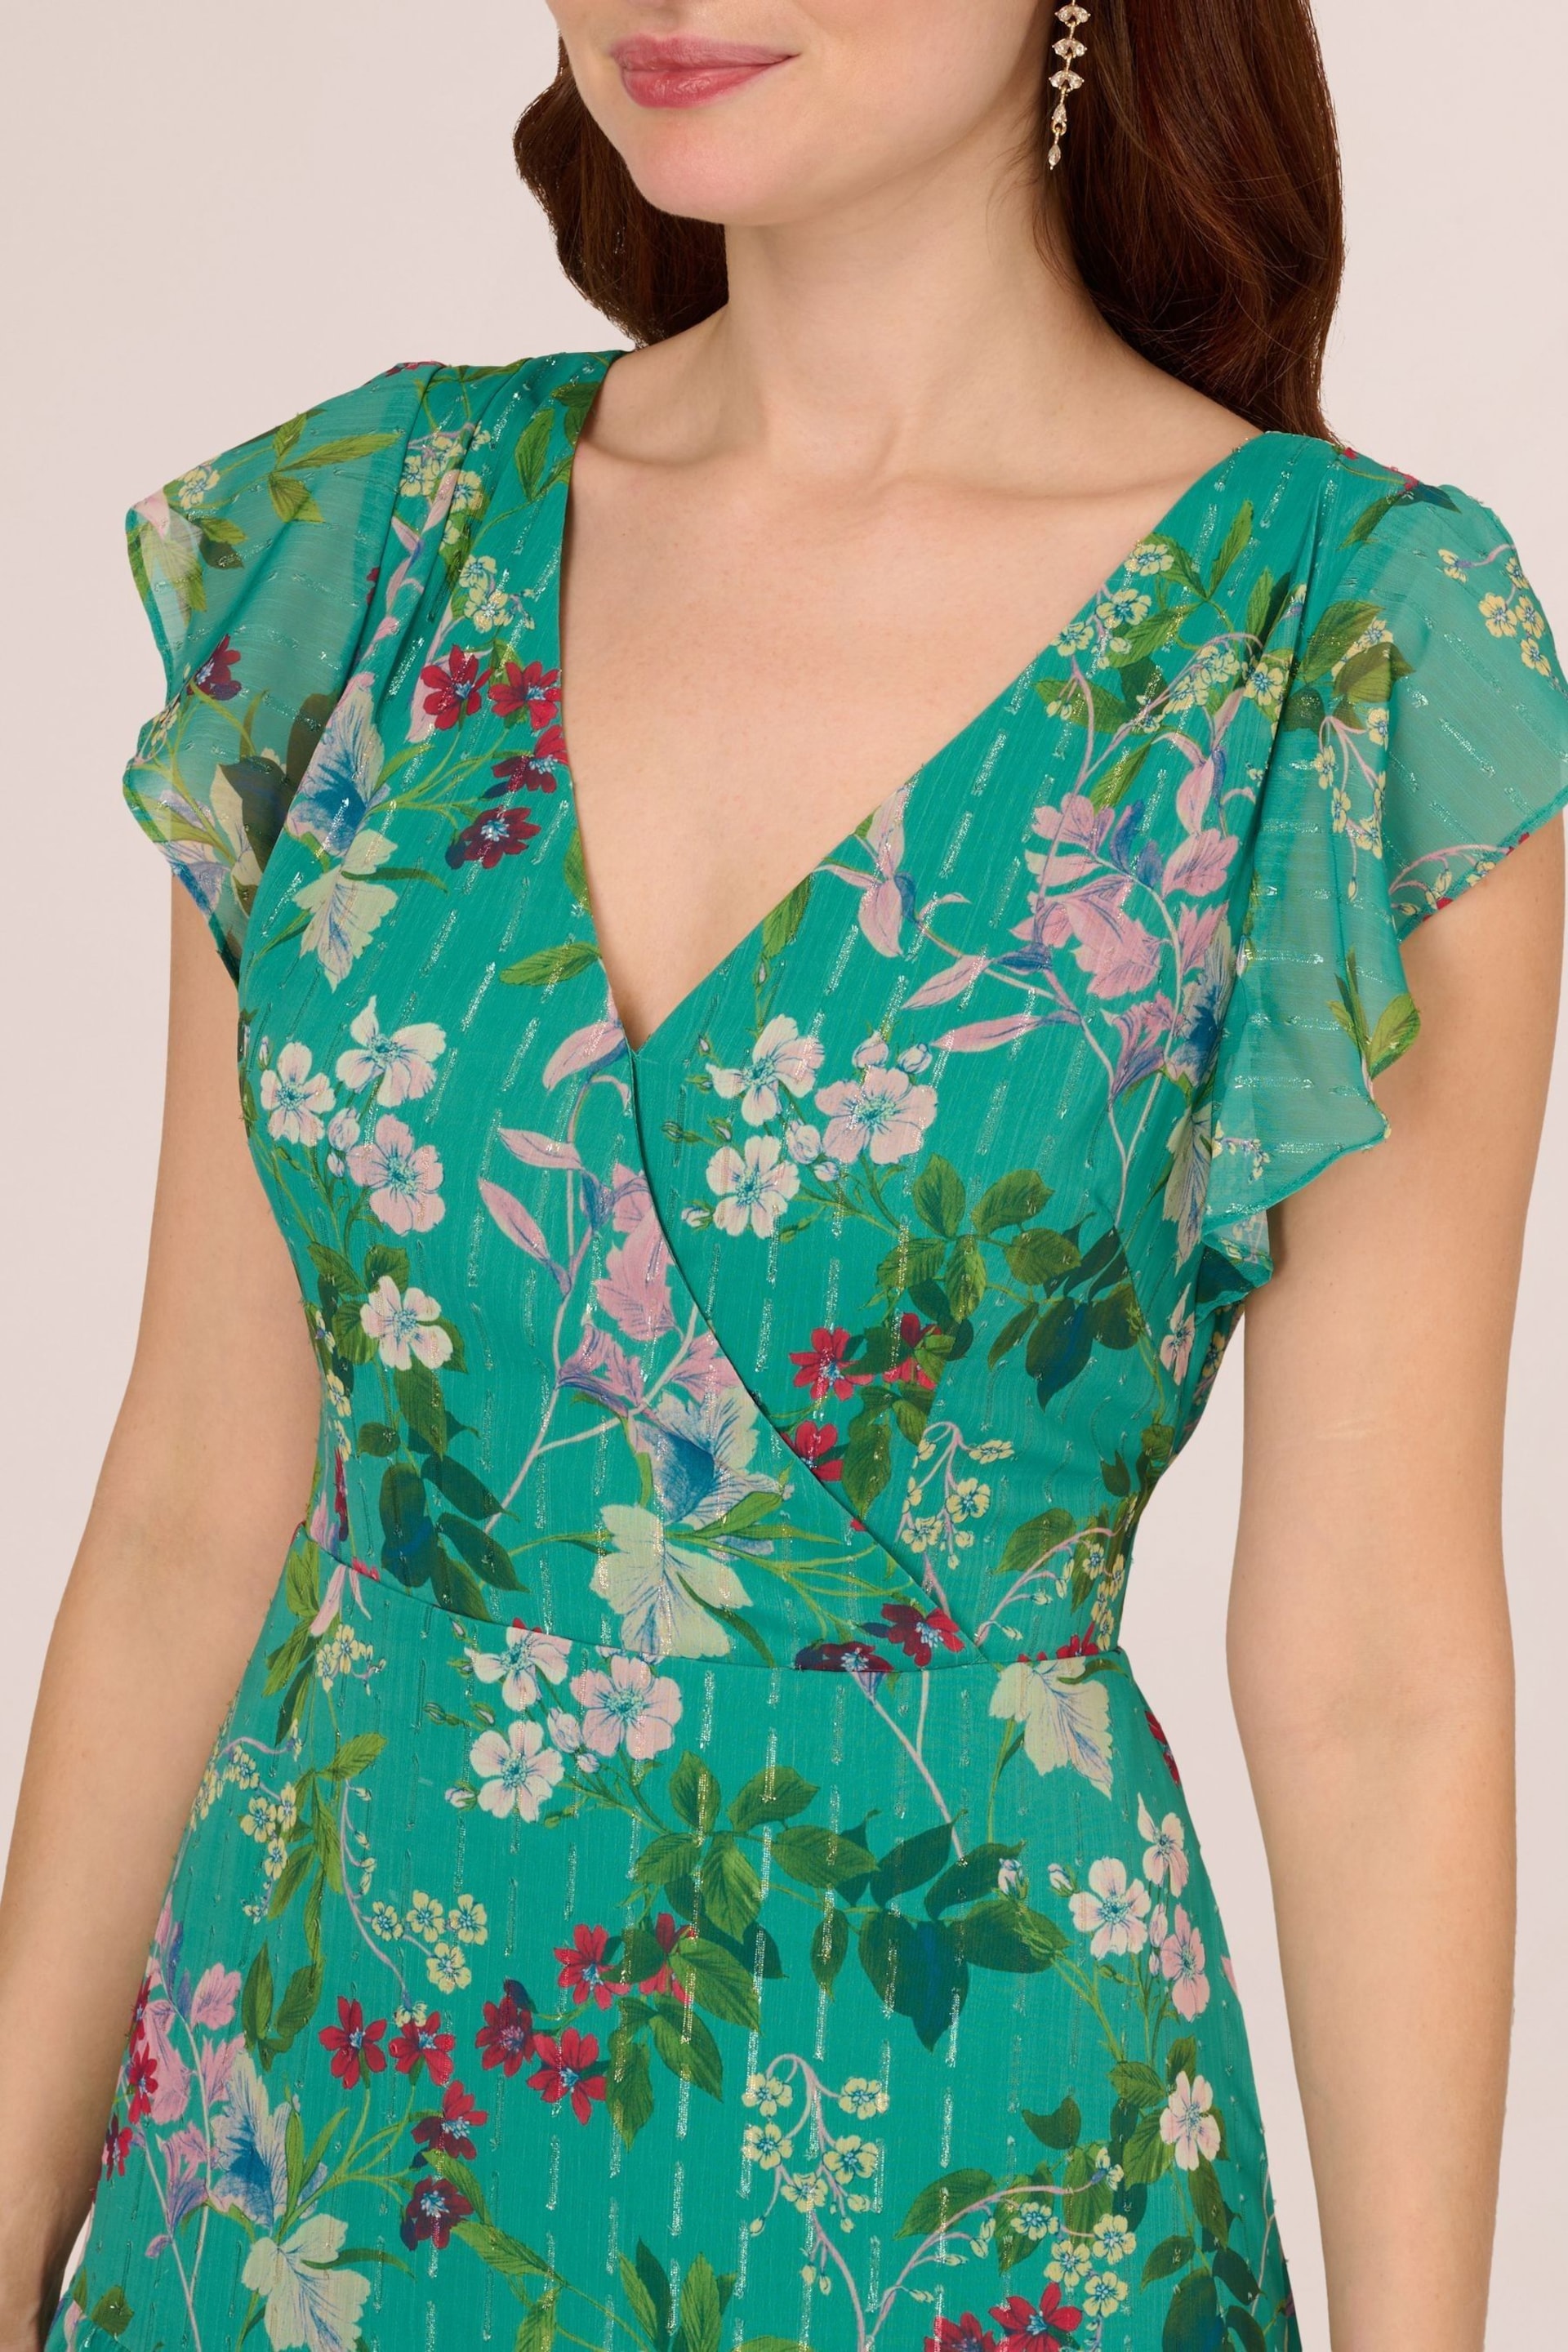 Adrianna Papell Green Print Tier Maxi Dress - Image 4 of 7